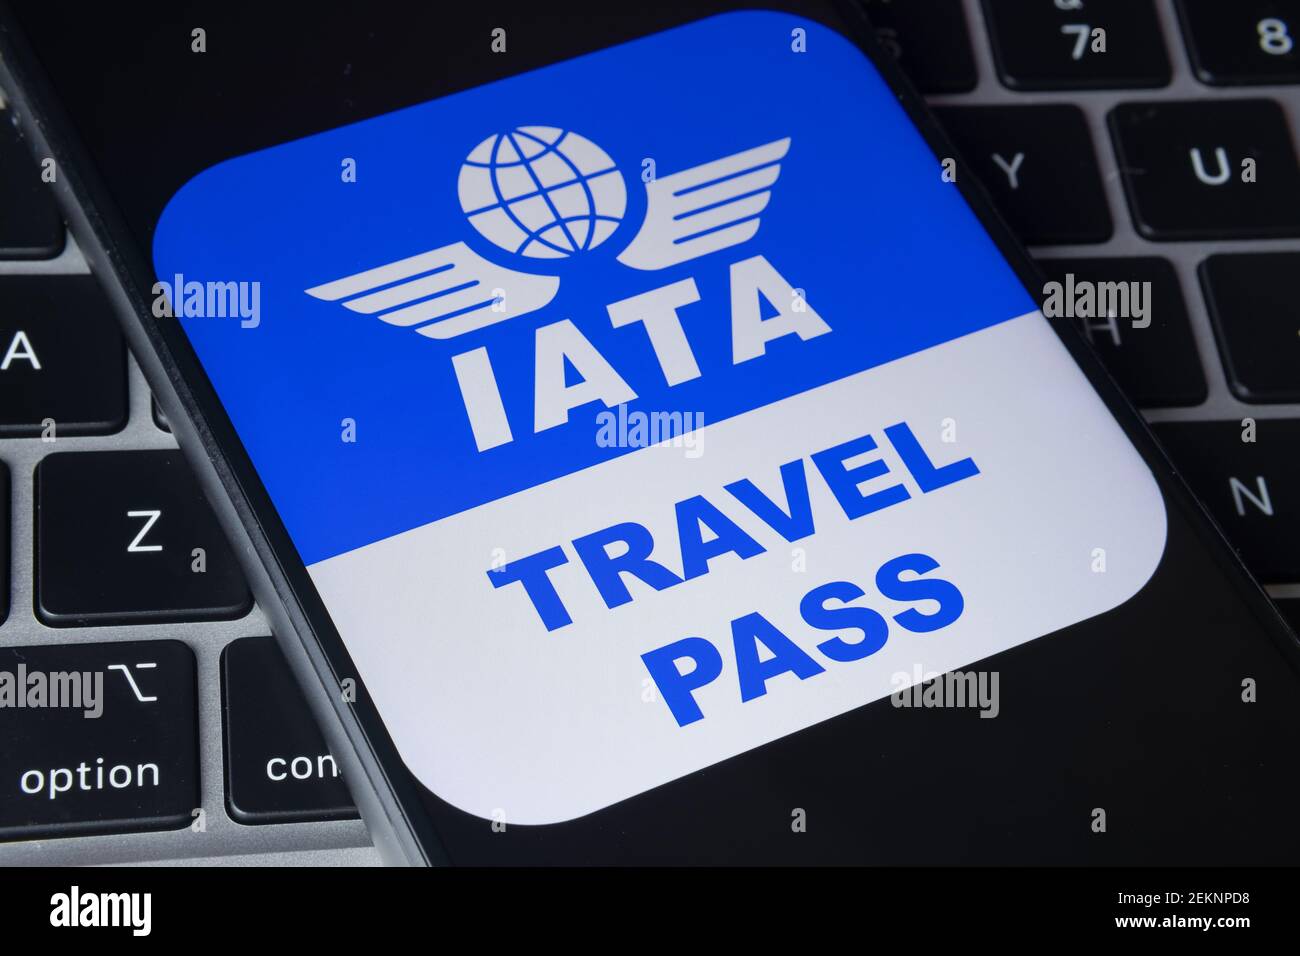 IATA logo with Travel Pass letters next to it seen on the screen of the smartphone. Stafford, United Kingdom, February 23, 2021. Stock Photo